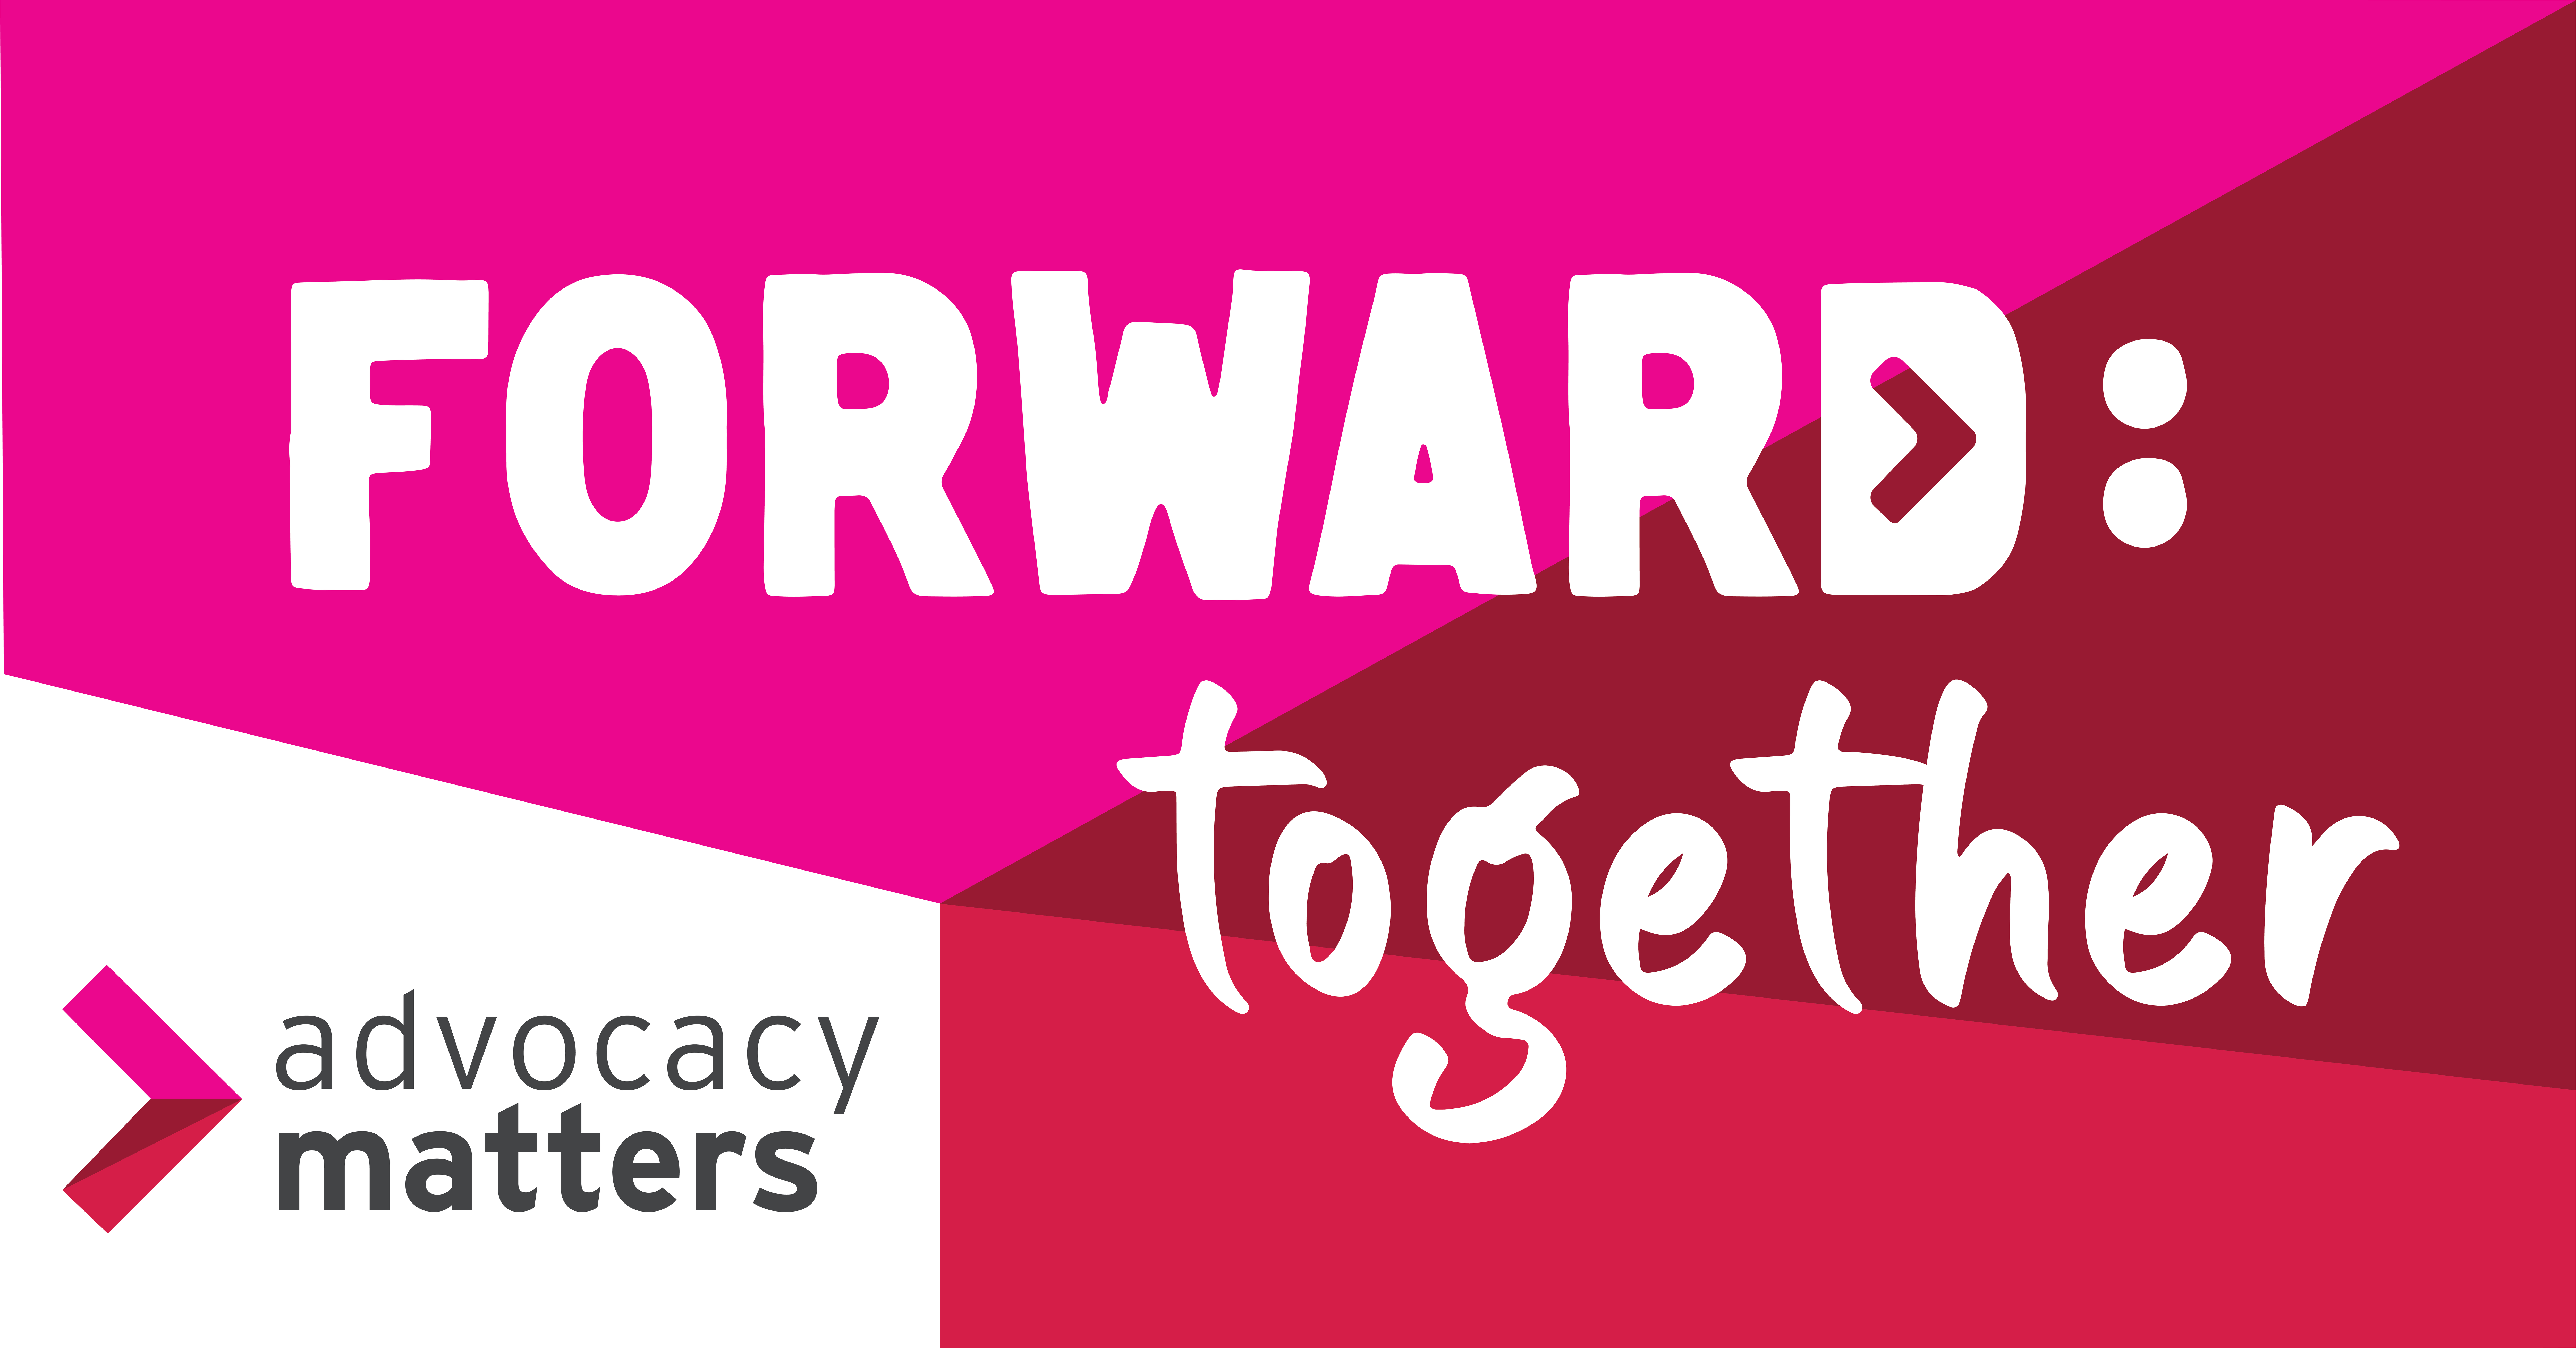 FORWARD: together - advocacy matters